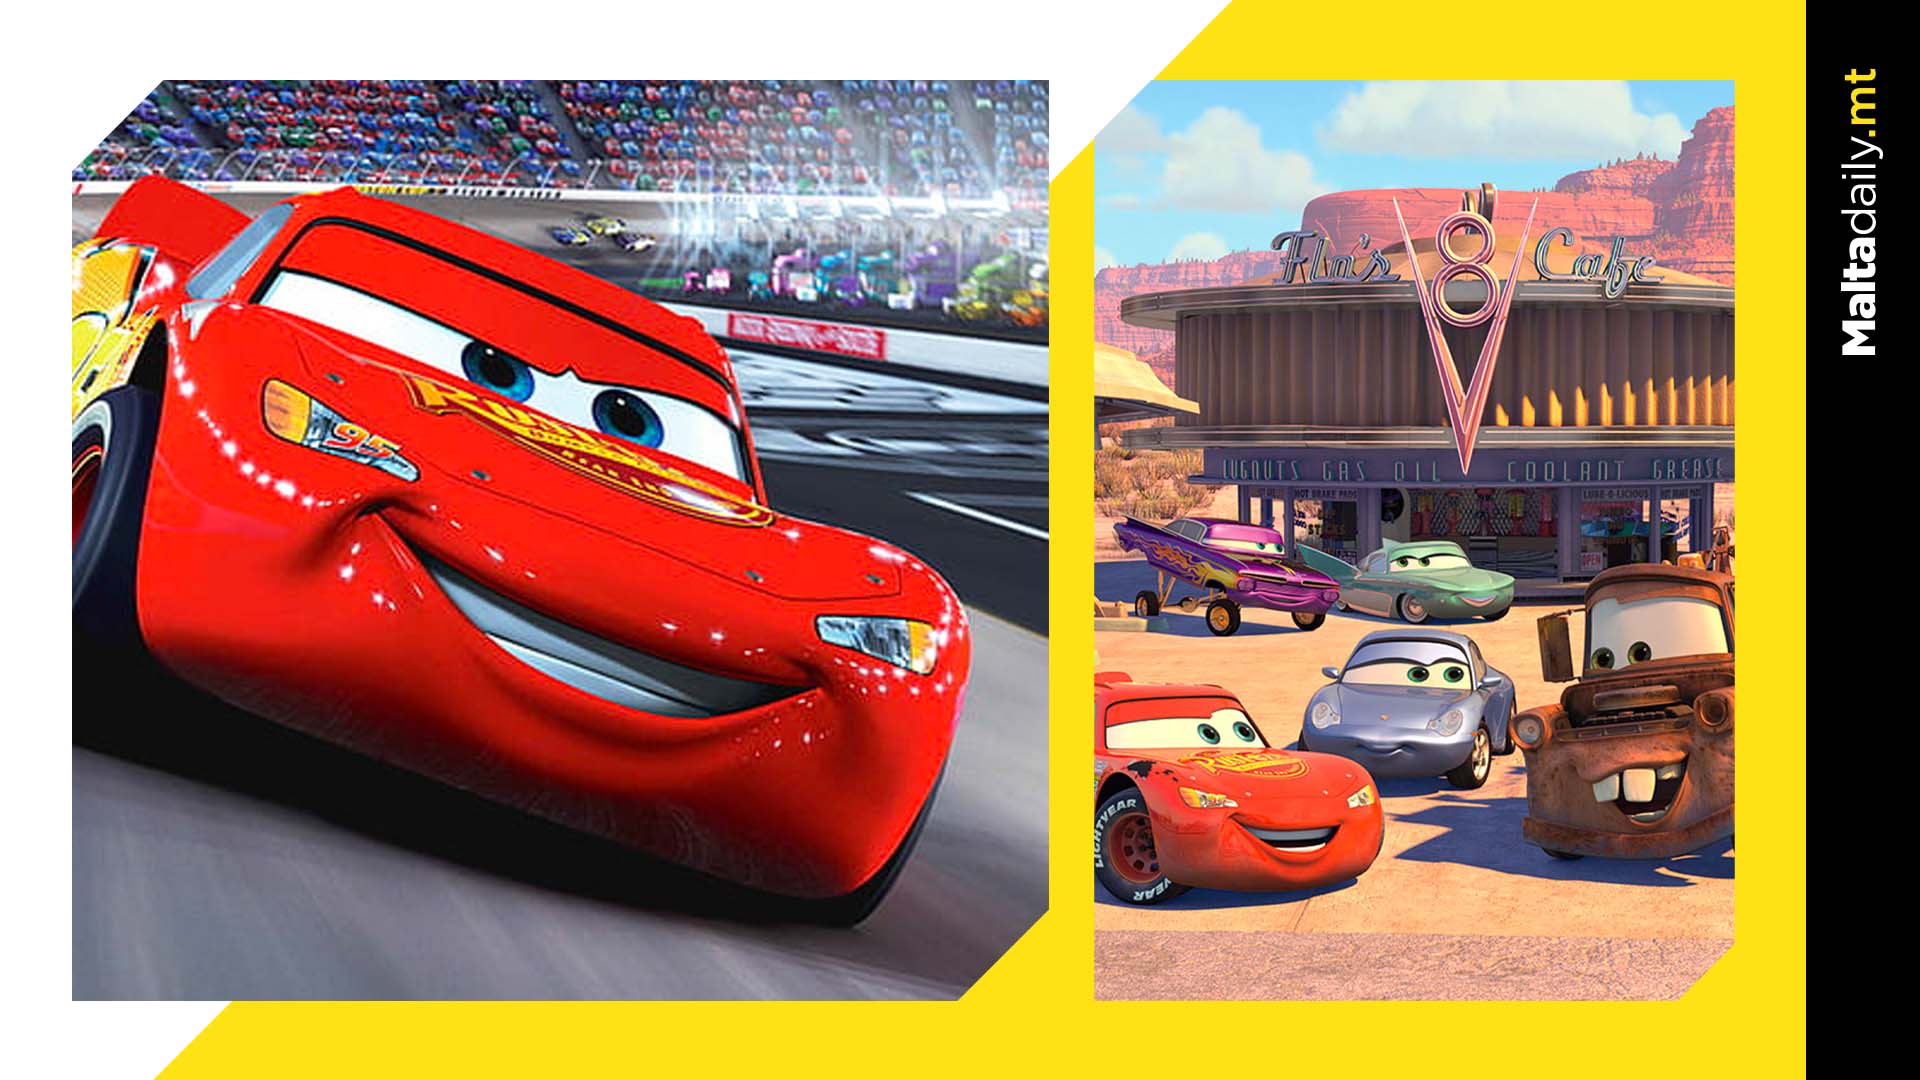 Cars was released in cinemas 17 years ago